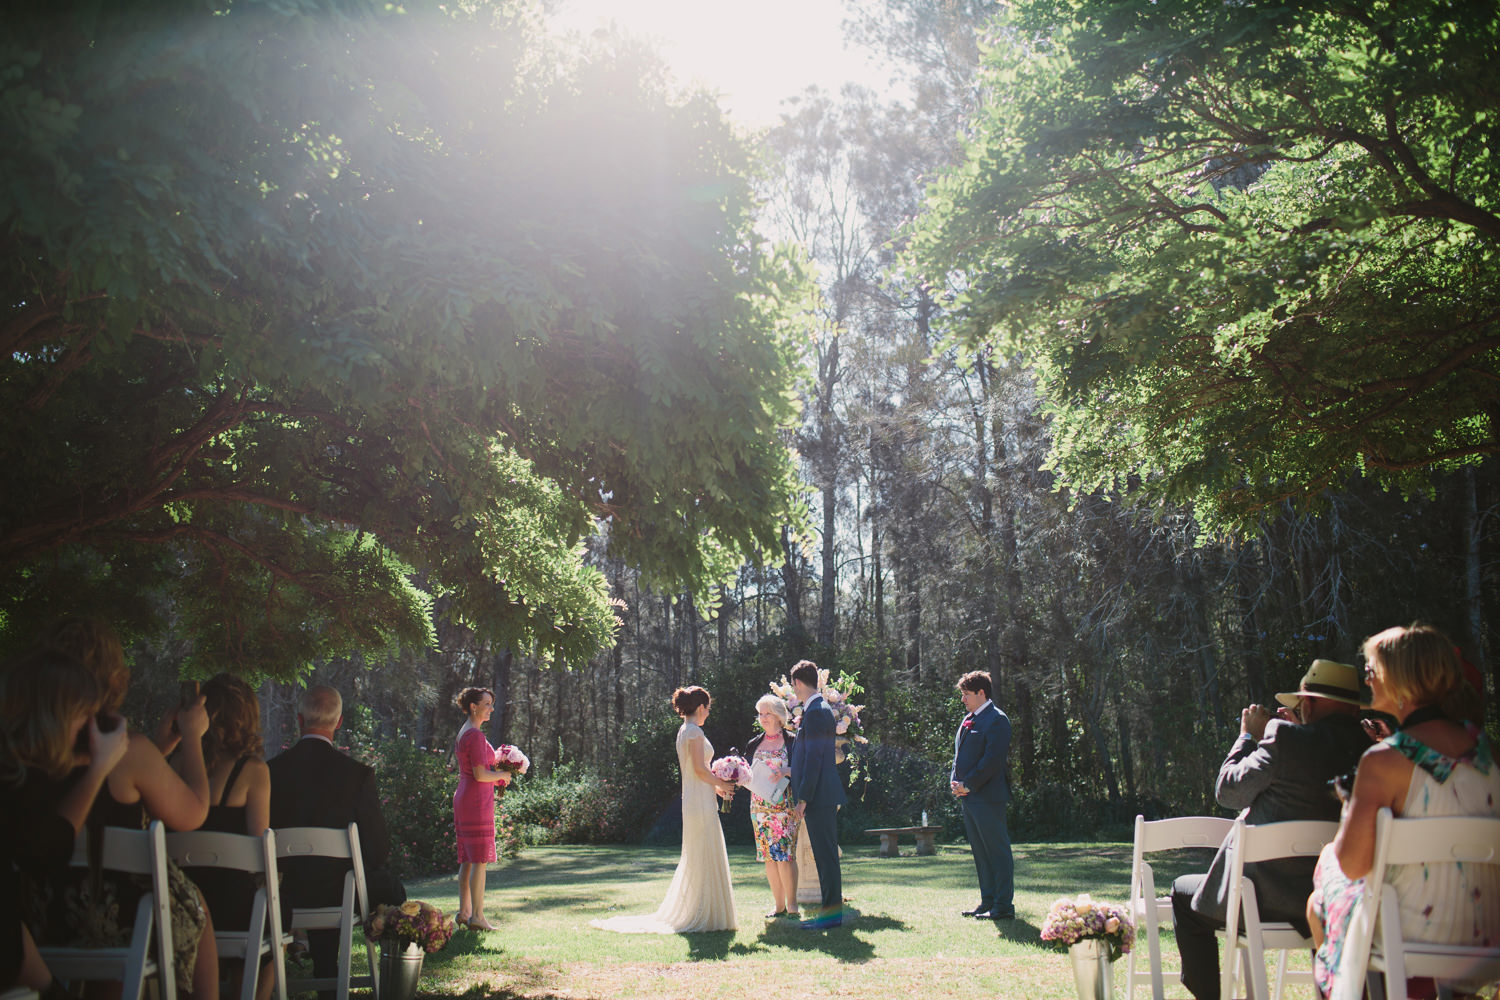 Exchanging wedding vows in the Hunter Valley